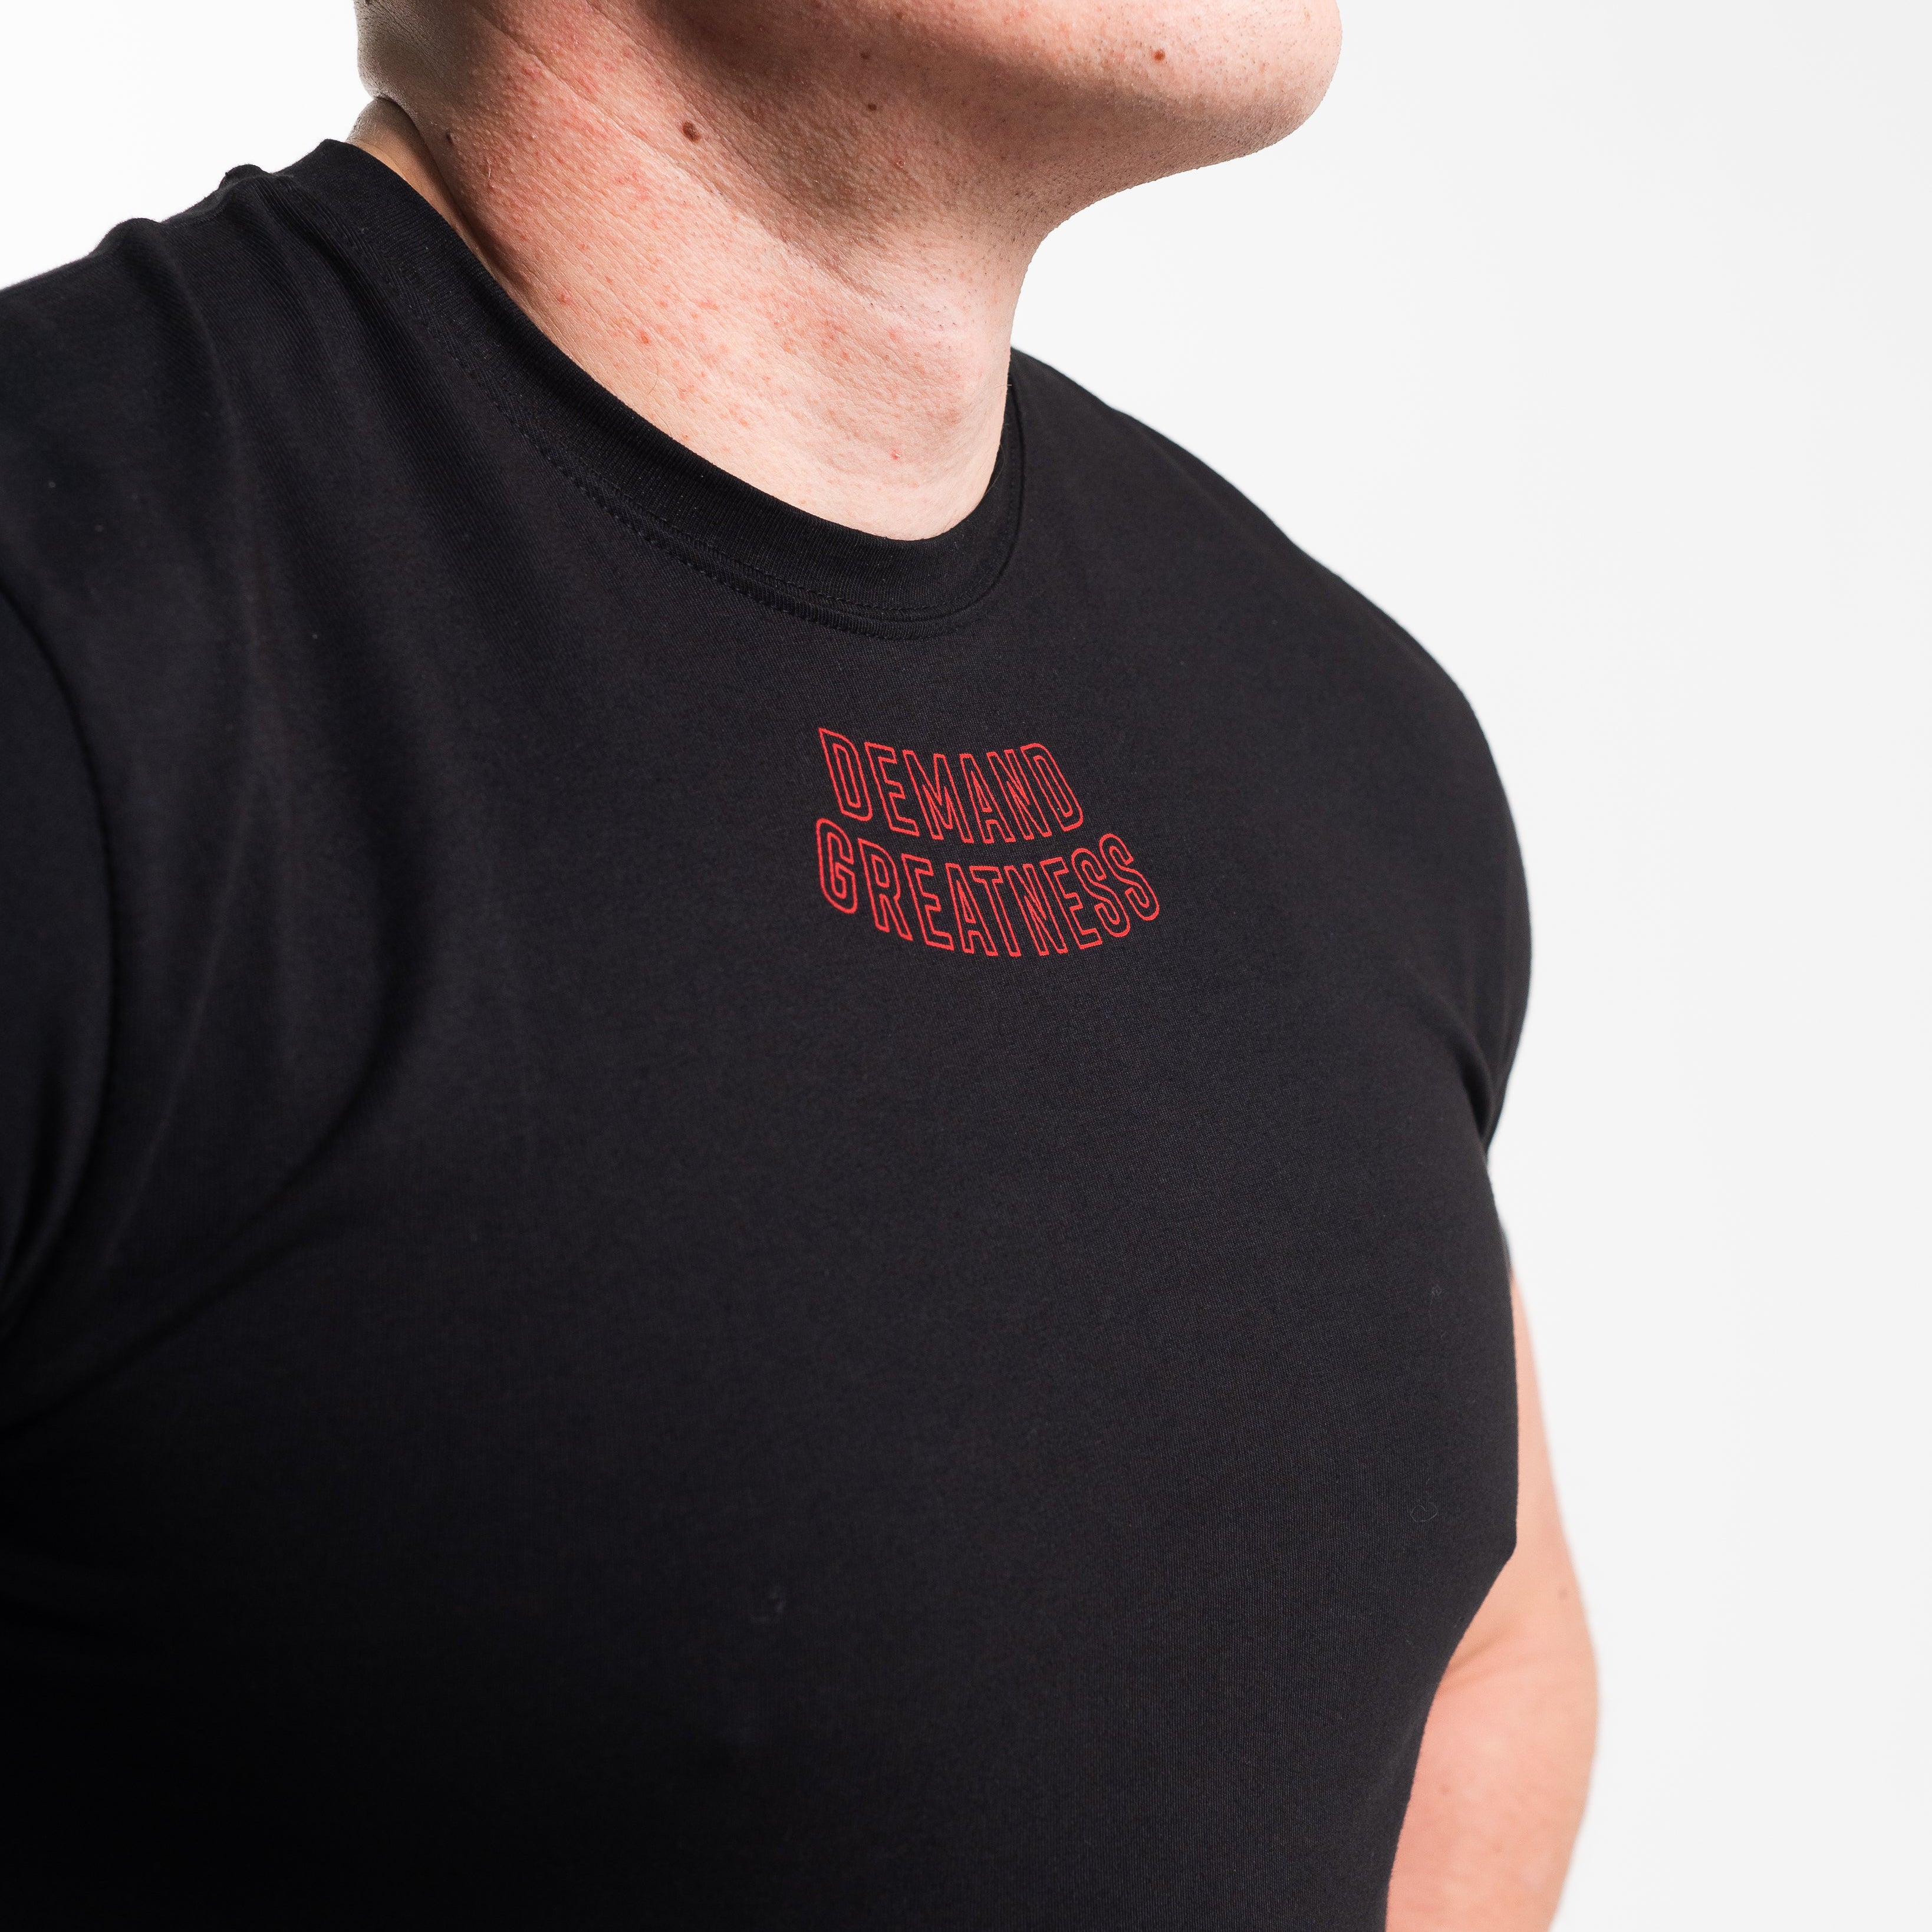 DG23 Red Dawn is our newmeet shirt design highlighting Demand Greatness with a double outline font to showcase your impact on the platform. The DG23 Meet Shirt is IPF Approved. Shop the full A7 Powerlifting IPF Approved Equipment collection. The IPF Approved Kit includes Powerlifting Singlet, A7 Meet Shirt, A7 Zebra Wrist Wraps, A7 Deadlift Socks, Hourglass Knee Sleeves (Stiff Knee Sleeves and Rigor Mortis Knee Sleeves). All A7 Powerlifting Equipment shipping to UK, Norway, Switzerland and Iceland.